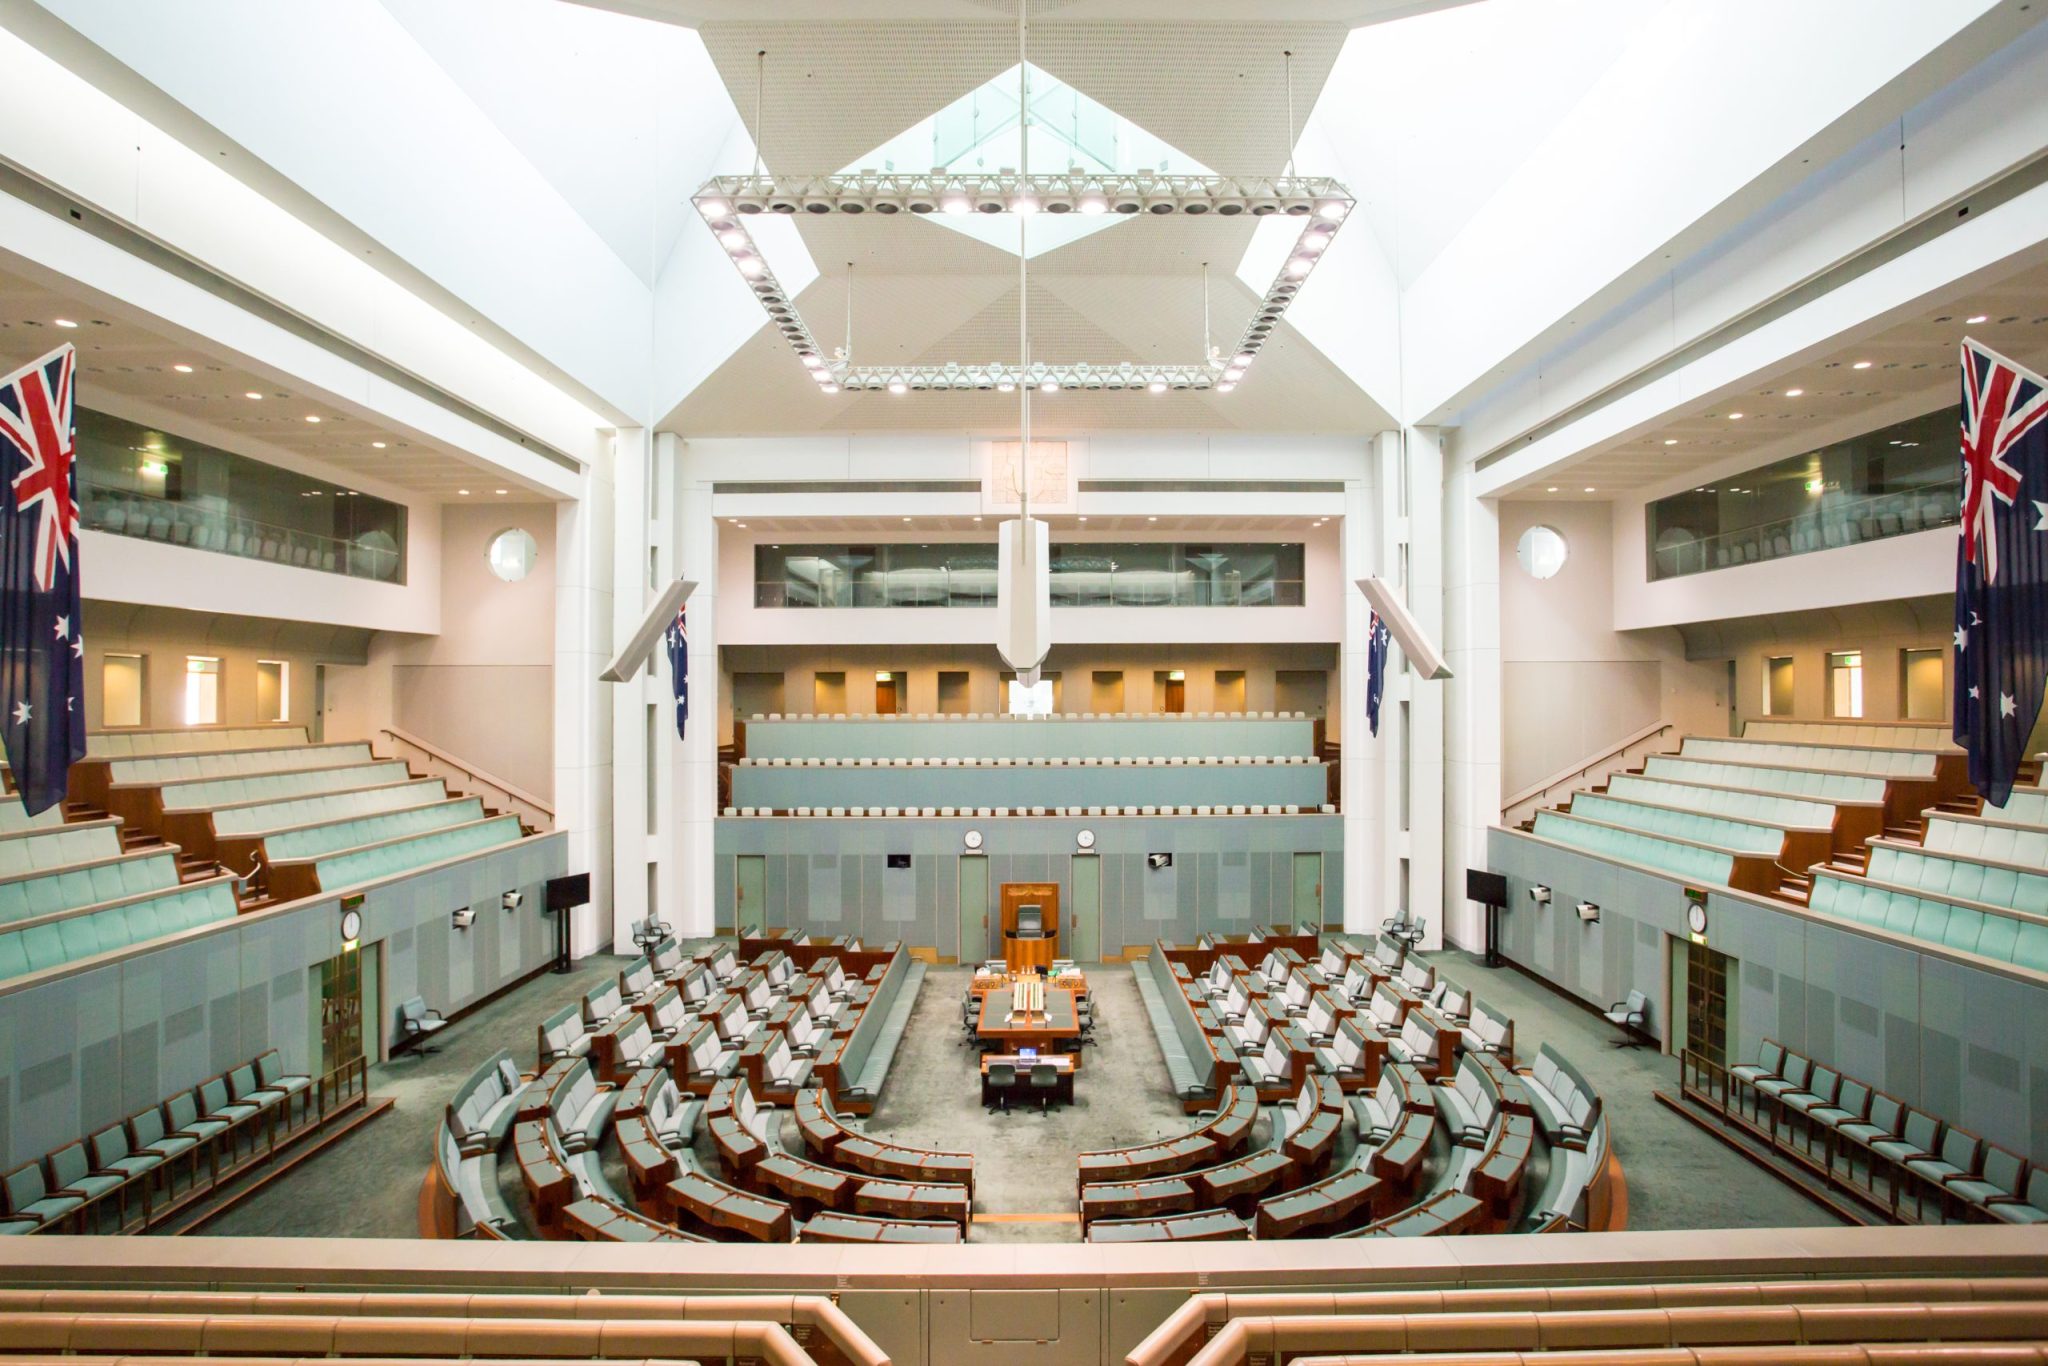 CANBERRA, AUSTRALIA - MAR 25, 2016: Interior view of the House of Representatives in Parliament House, Canberra, Australia